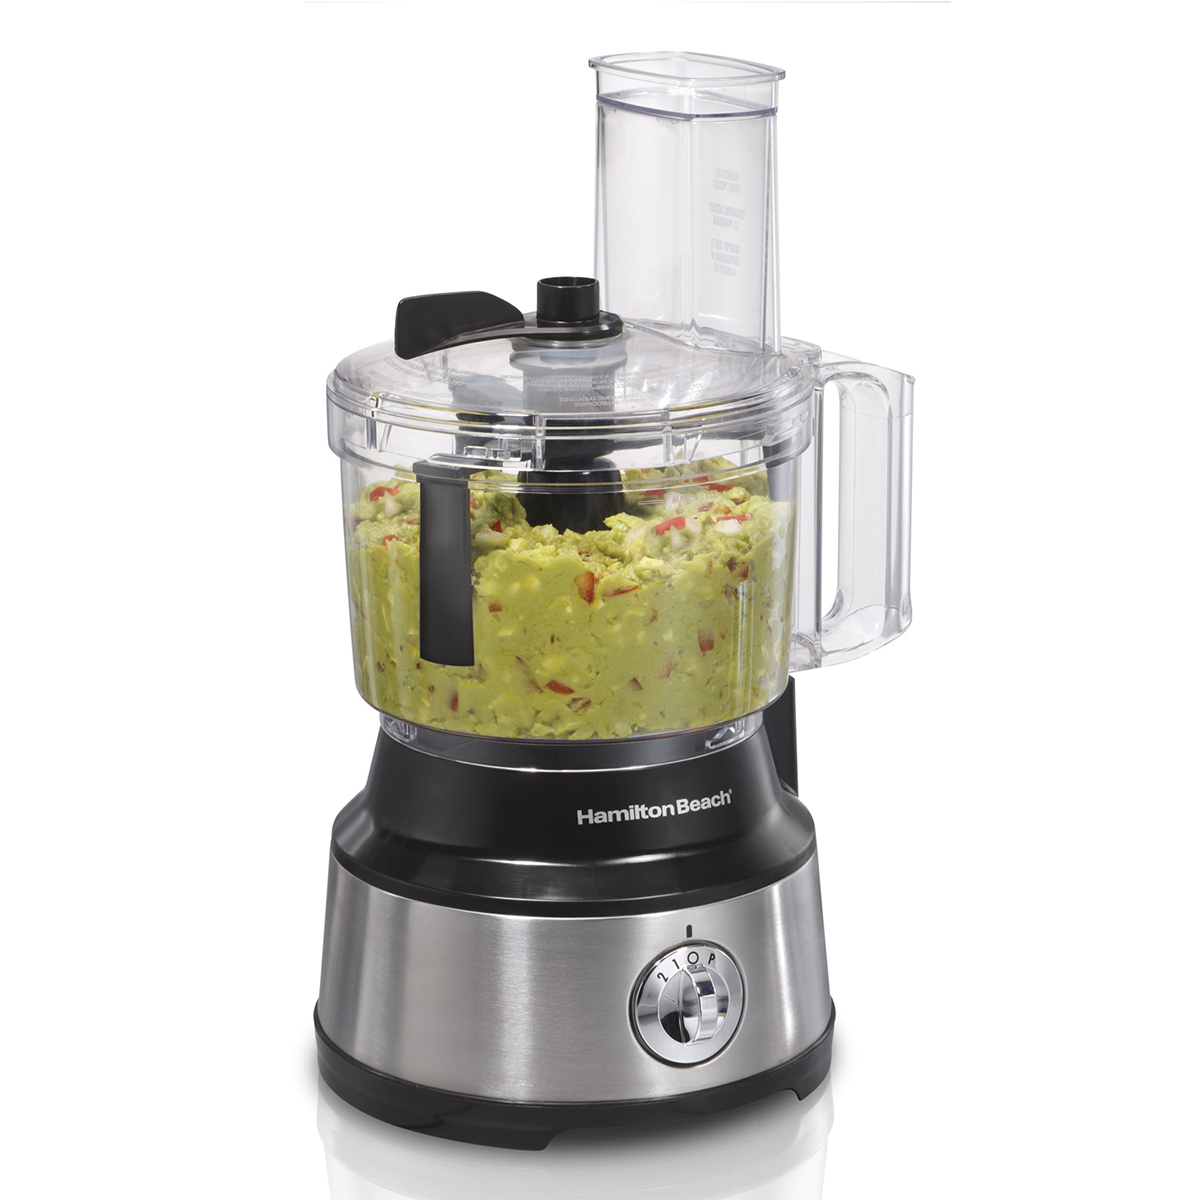 10-Cup Food Processor with Bowl Scraper, Black & Stainless (70730G)